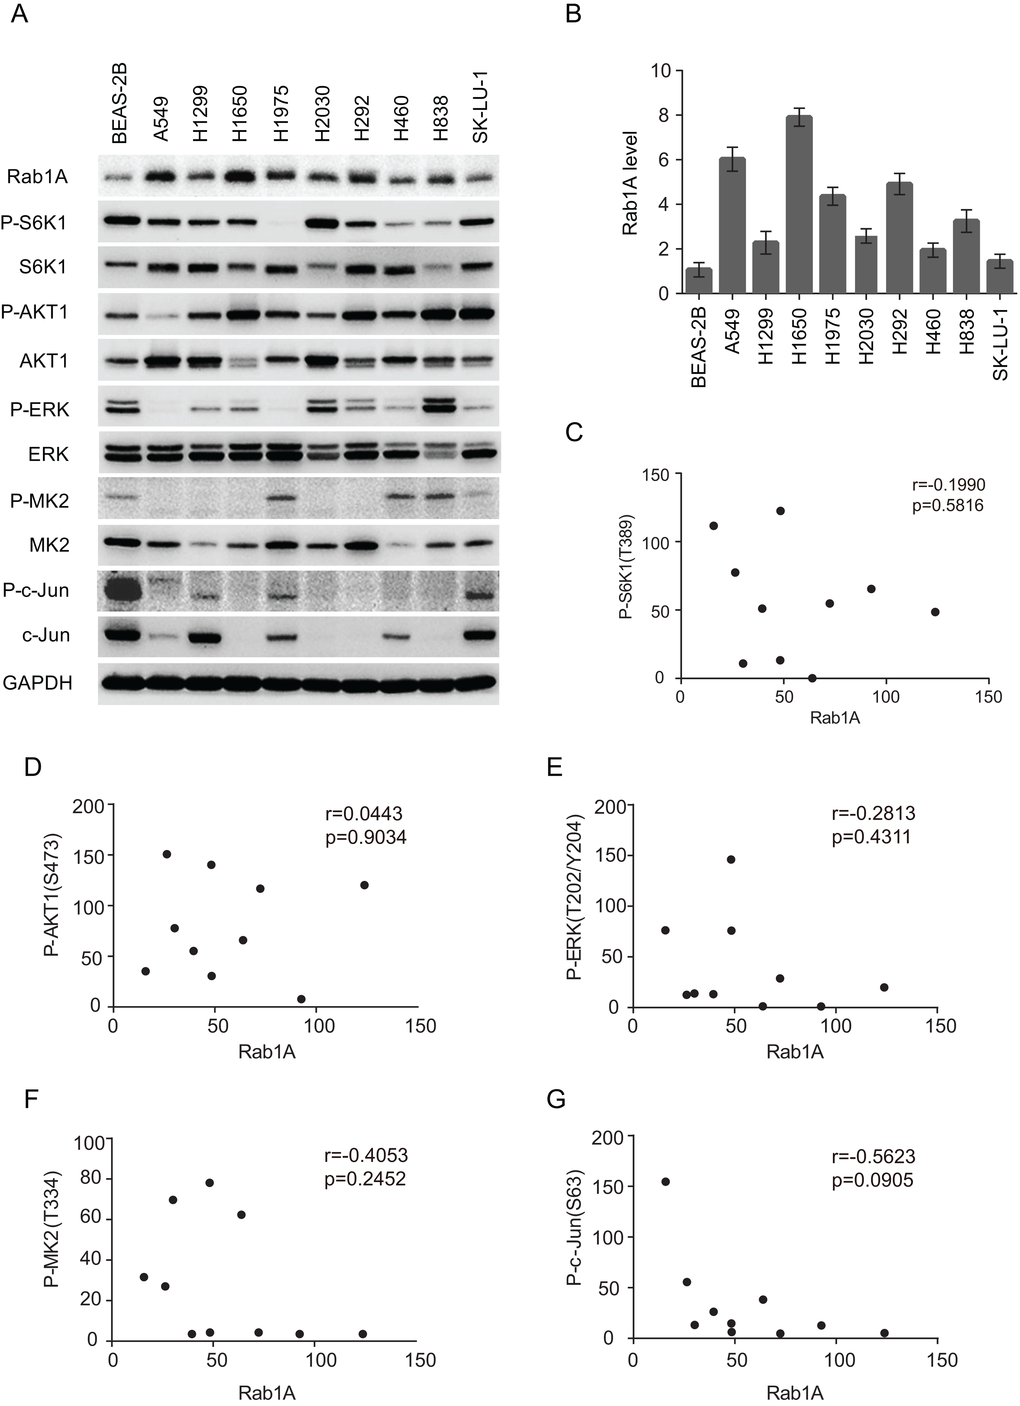 Rab1A is overexpressed in lung cancer cell lines but is not correlated with mTORC or MAPK expression. (A) Expression of Rab1A, P-S6K, S6K, P-AKT, AKT, P-ERK, ERK, P-MK2, MK2, P-c-Jun and c-Jun was examined in a panel of lung cancer cell lines by immunoblot. GAPDH served as a loading control. (B) Quantitative analysis of Rab1A protein levels in cell lines. The densitometry results for each Rab1A band were normalized to GAPDH, and the ratios between cancer cell lines and BEAS-2B were calculated and results represented in a histogram. Data represent means ± SD of three independent experiments. (C-F) Correlation plots of the expression level of Rab1A and P-S6K1 (T389; C), P-AKT (S473; D), P-ERK (T202/Y204; E), P-MK2 (T334; F) and P-c-Jun (S63; G). Shown are arbitrary units.